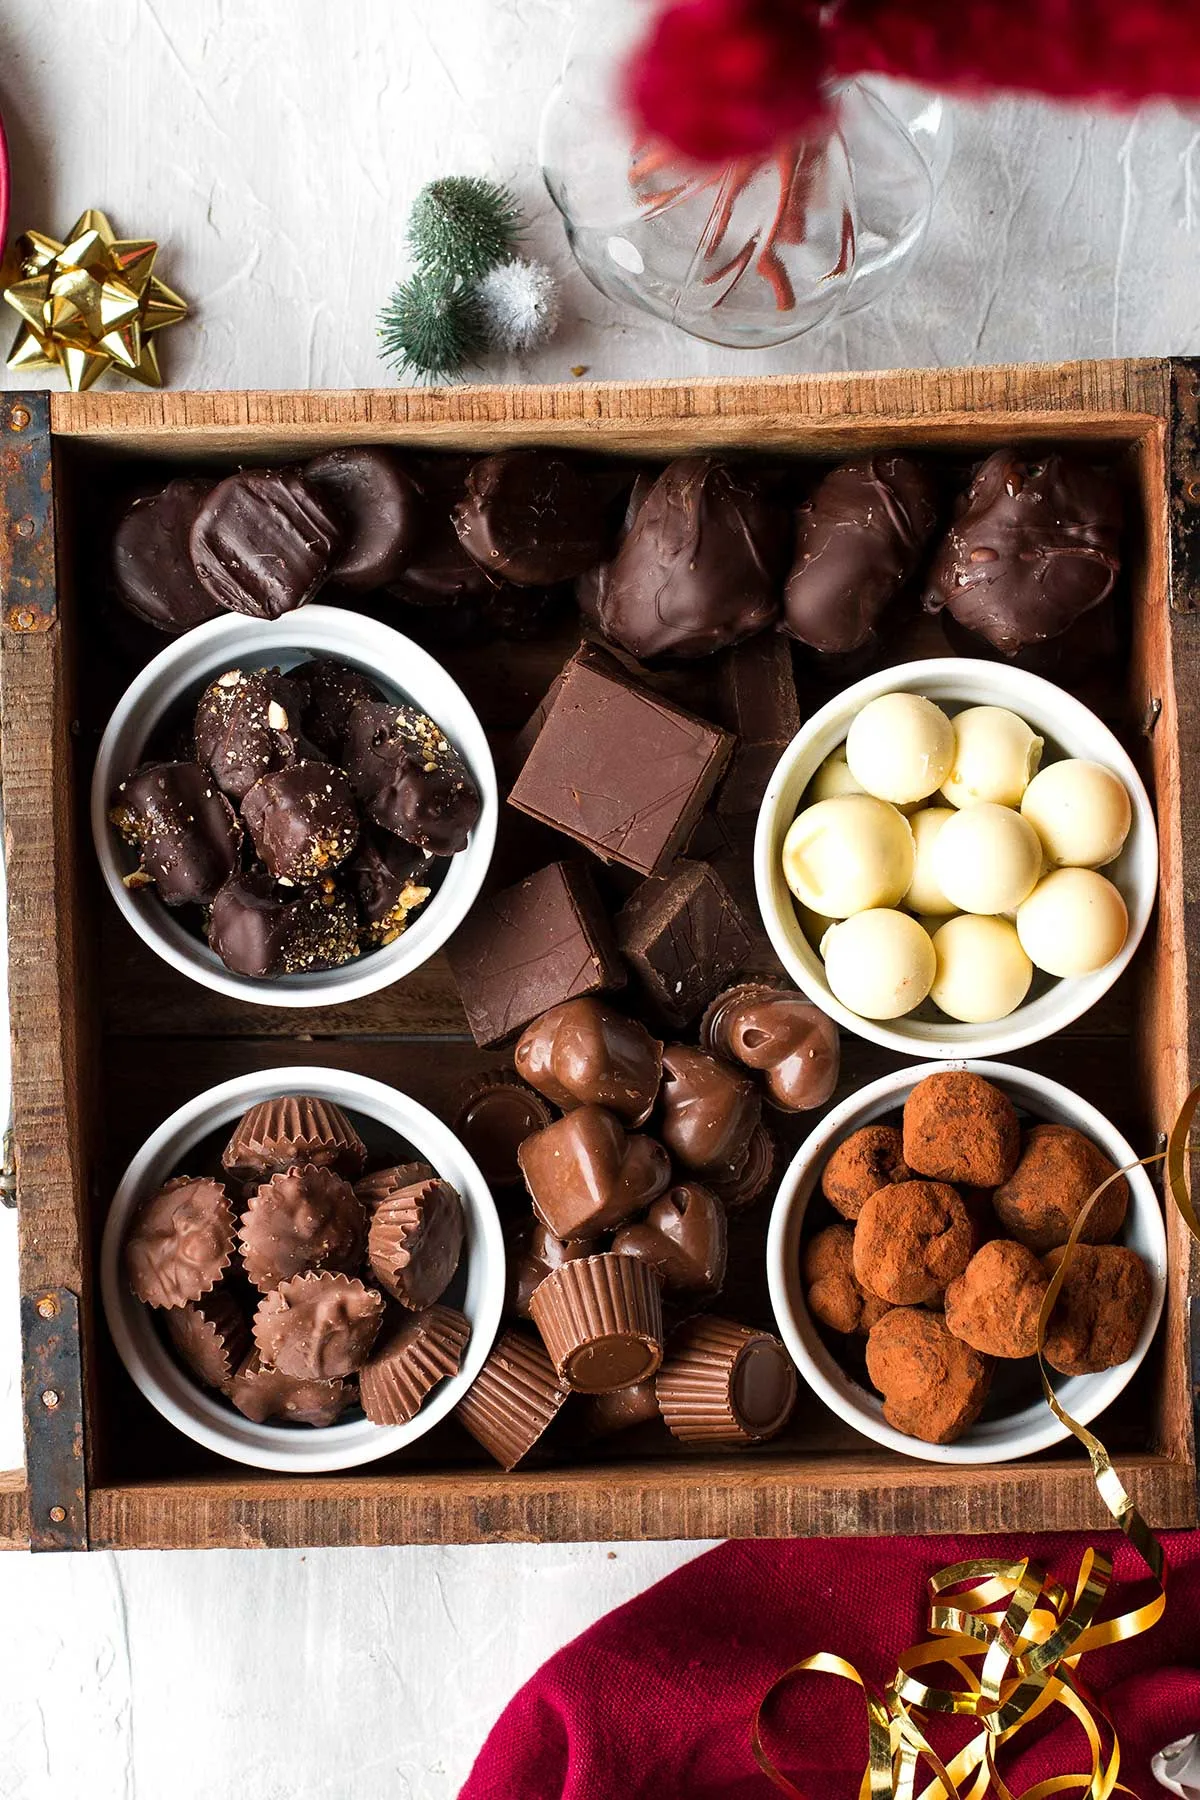 A wooden crate with 4 ramekins with chocolates and more around them.